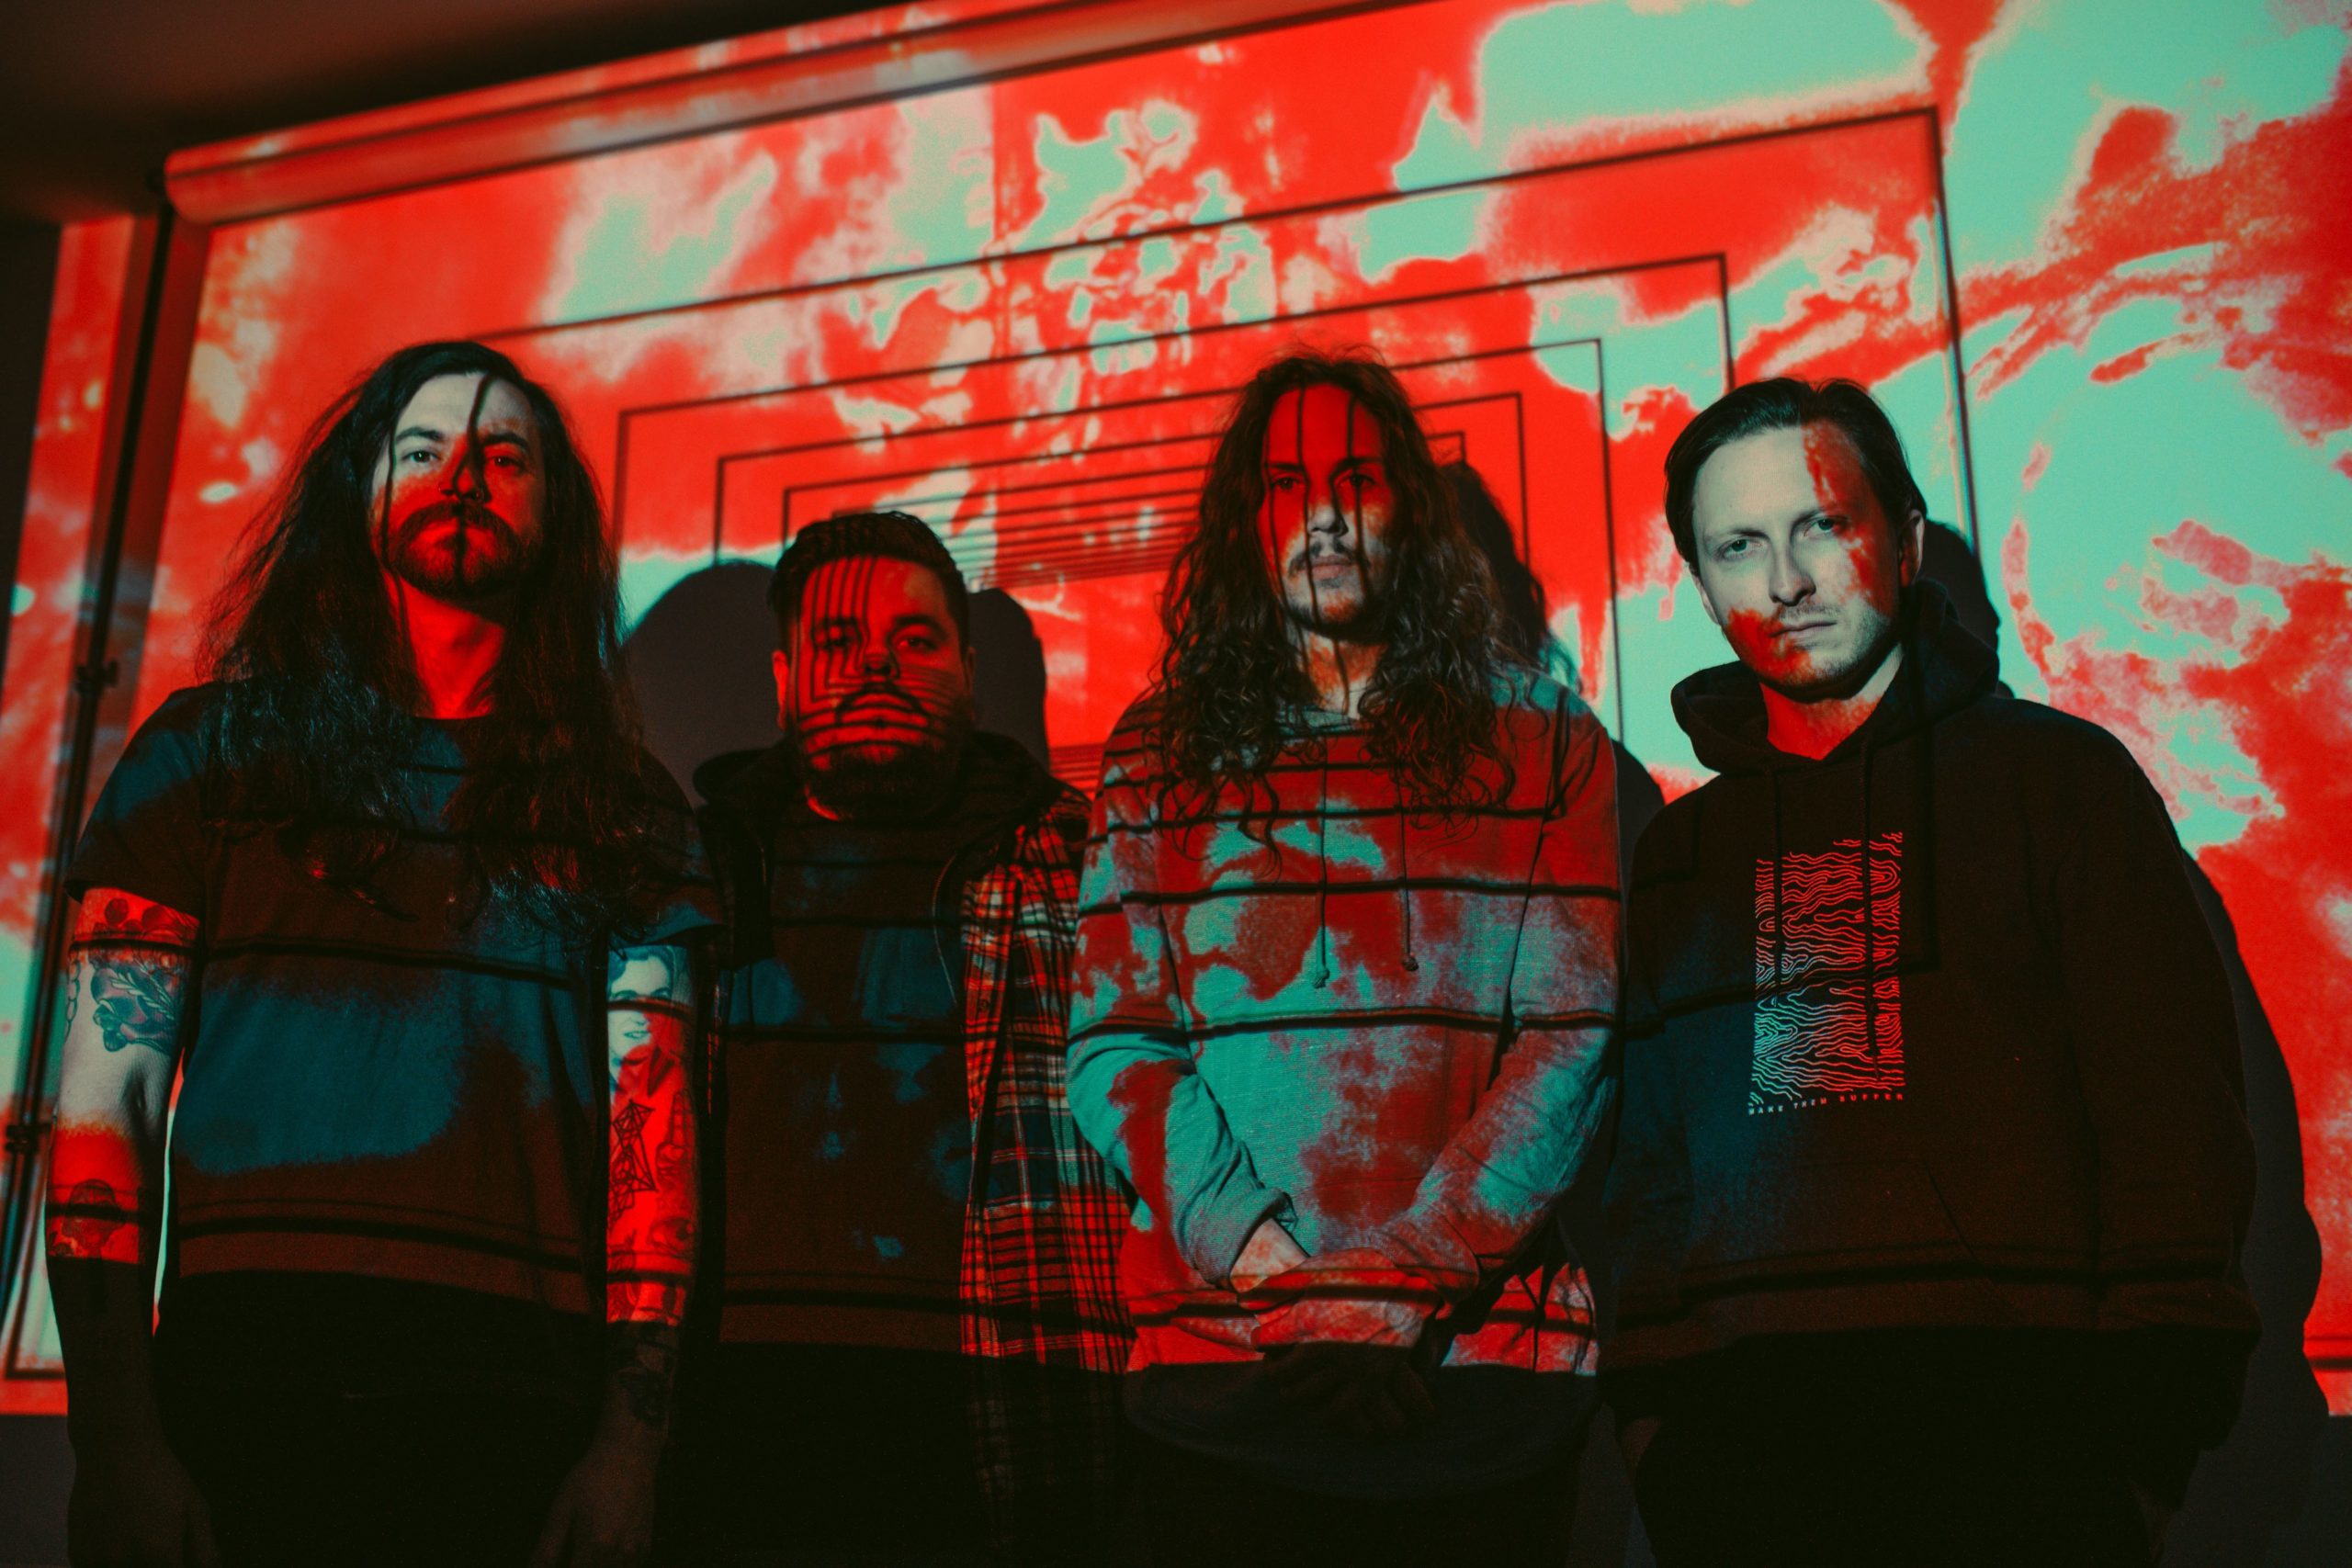 Silent release new music video for 'Trilogy' Distorted Sound